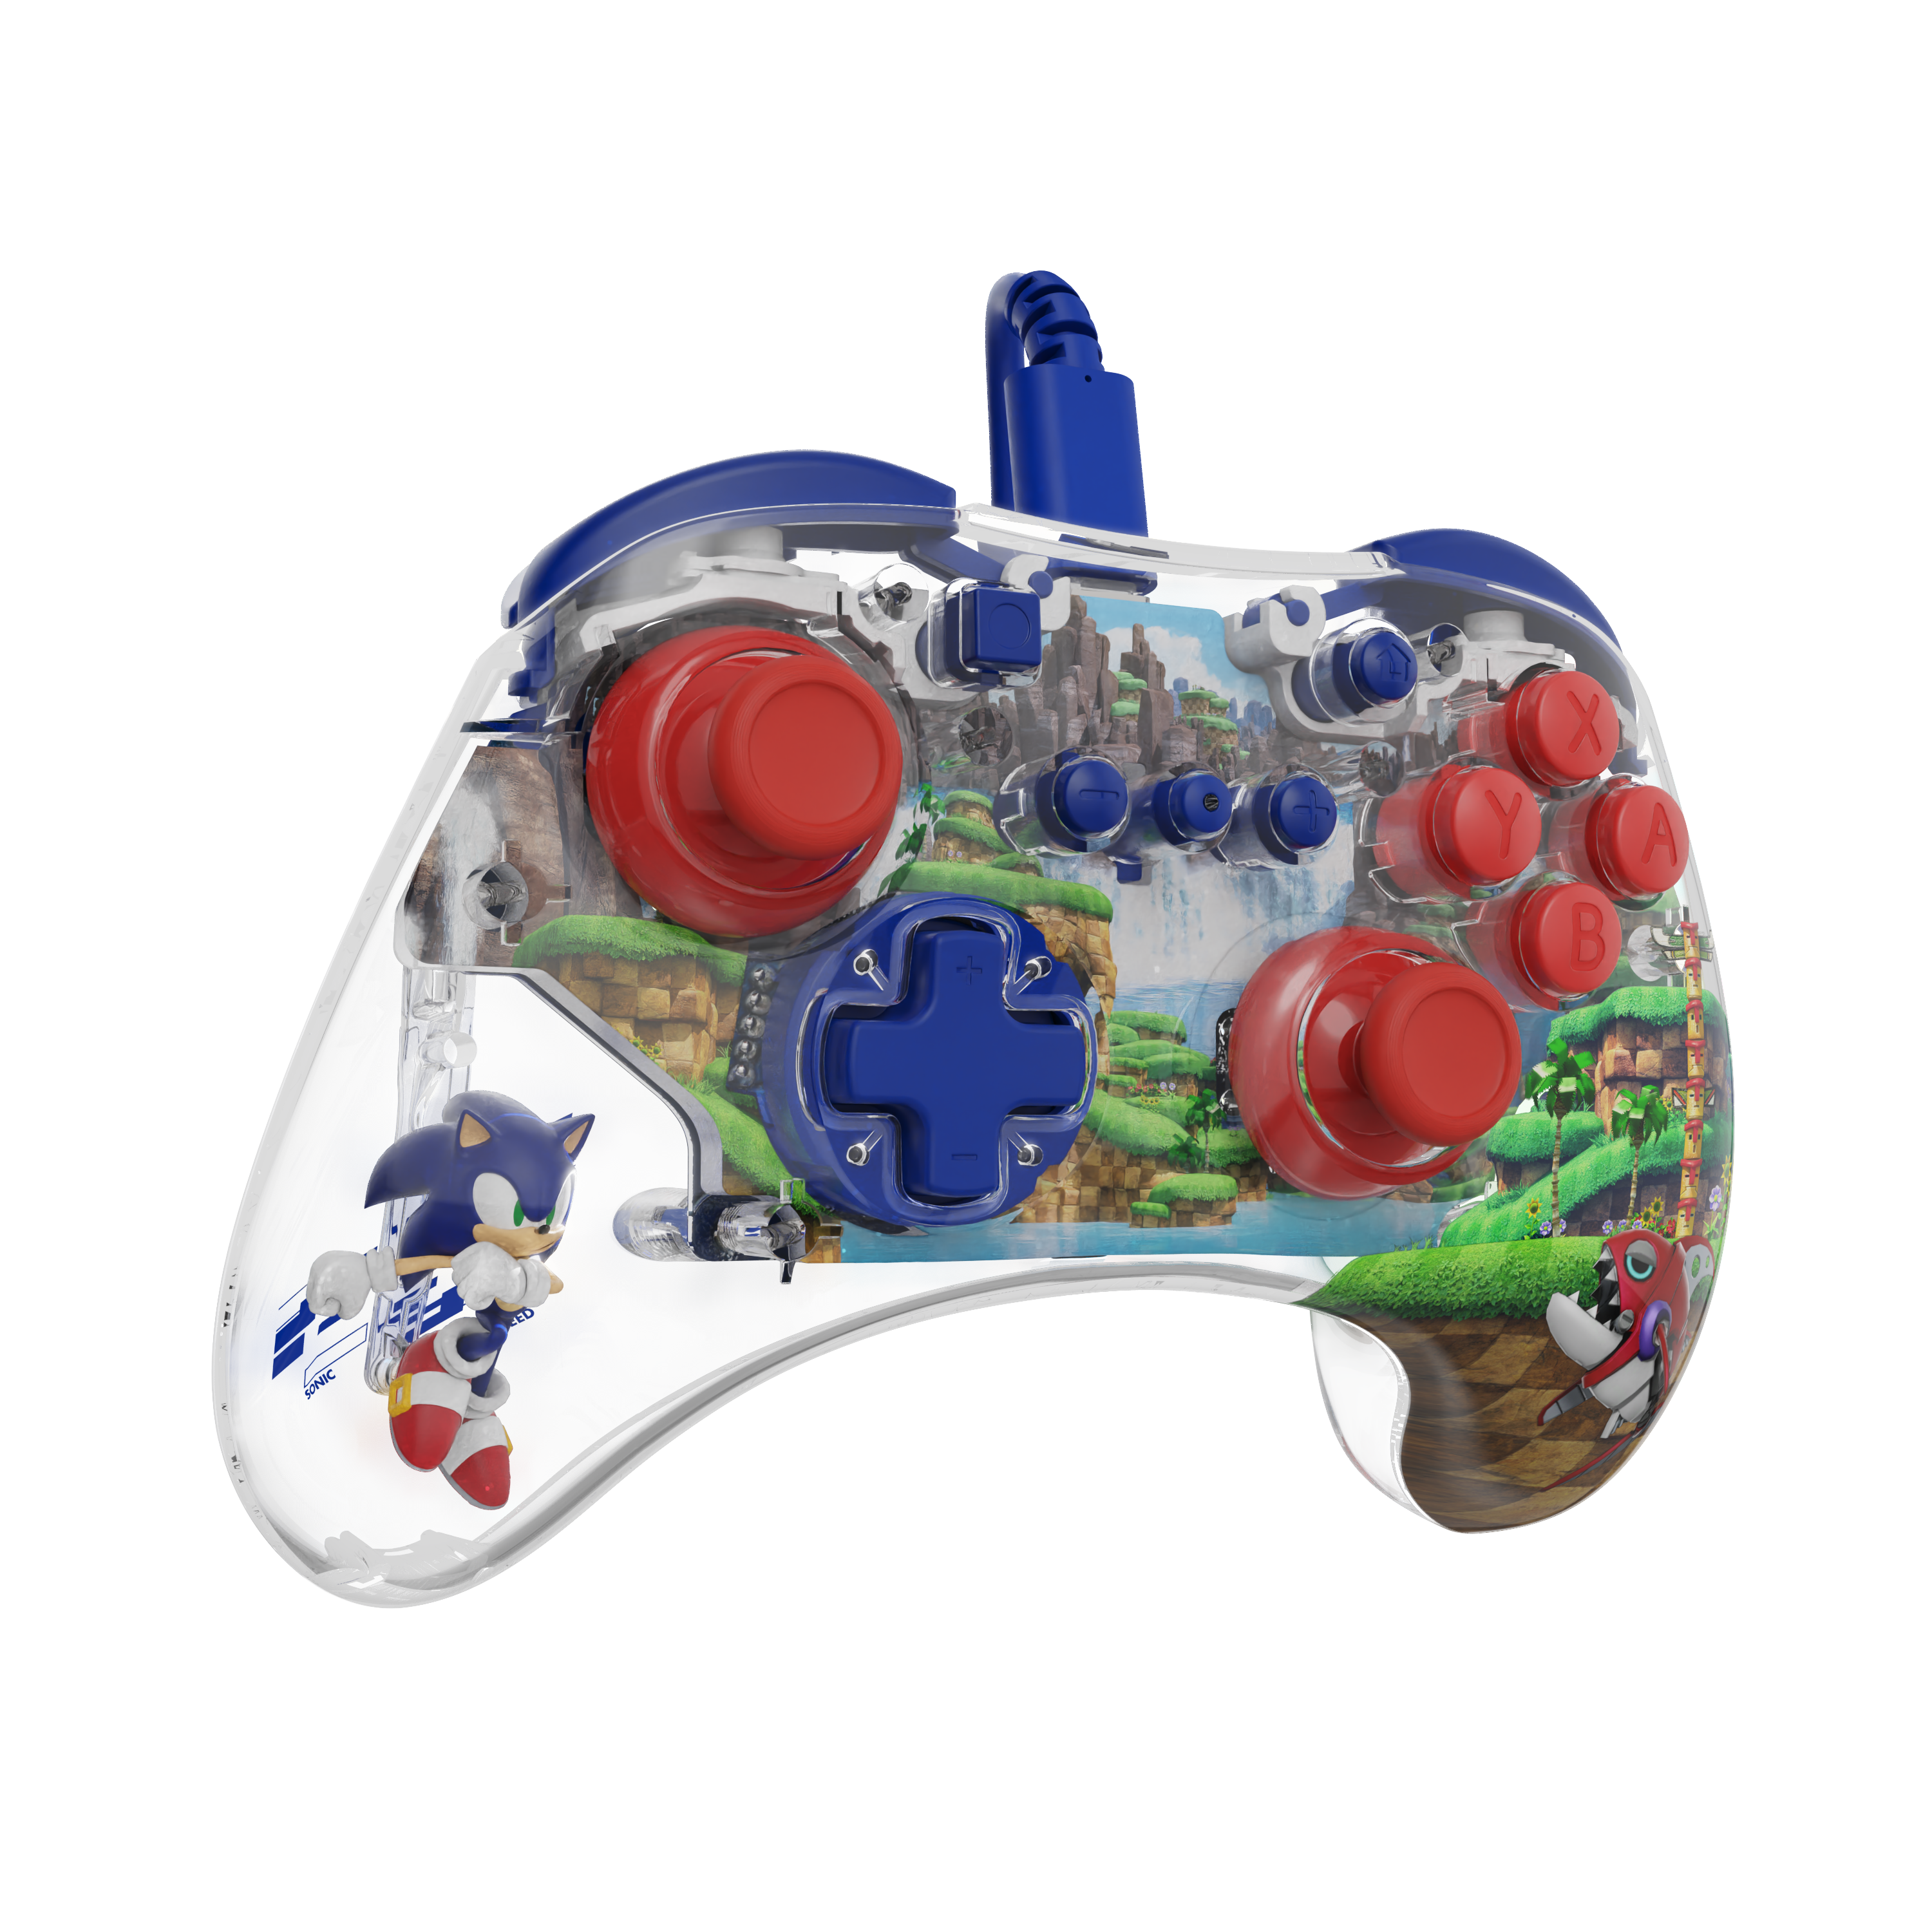  Sonic Superstars + Sonic REALMz Pro Controller Nintendo Switch.  : Everything Else